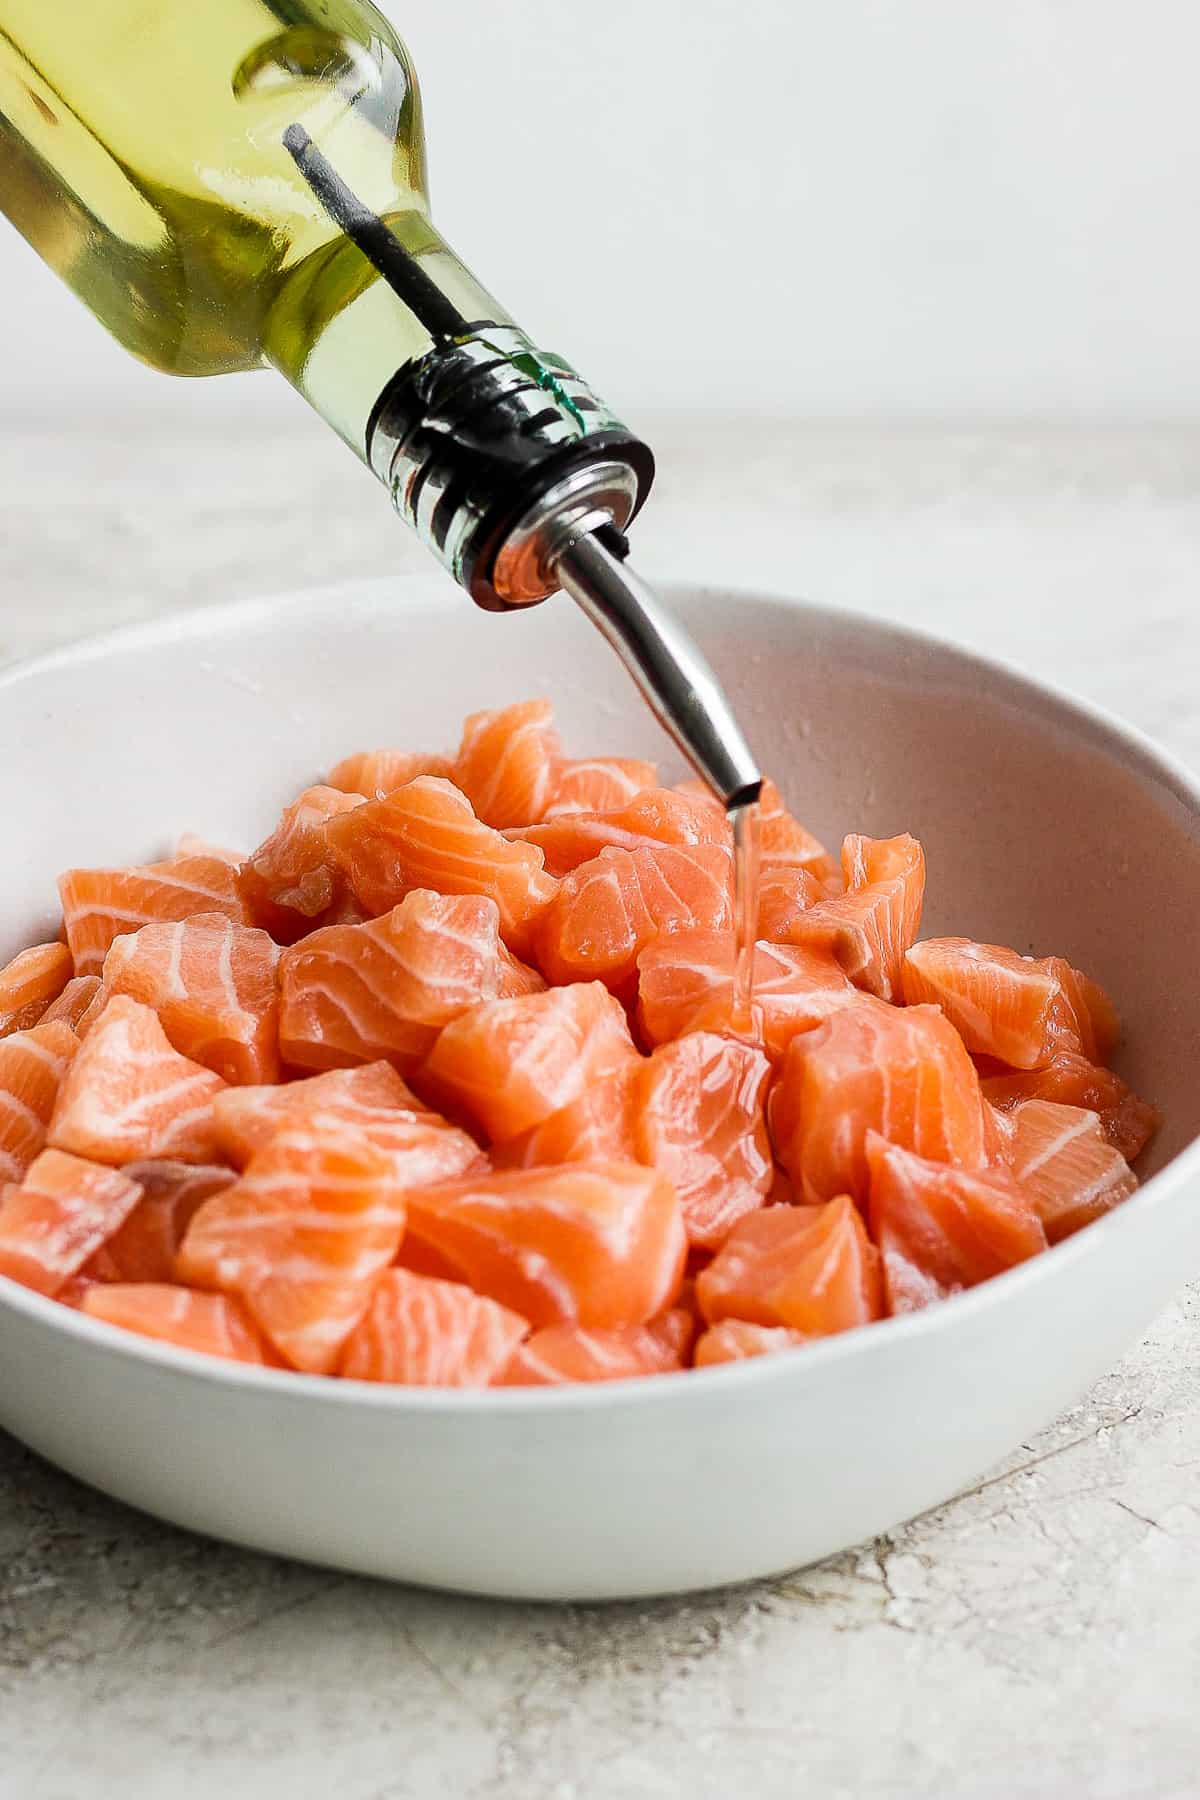 Oil being poured into a bowl of salmon bites.